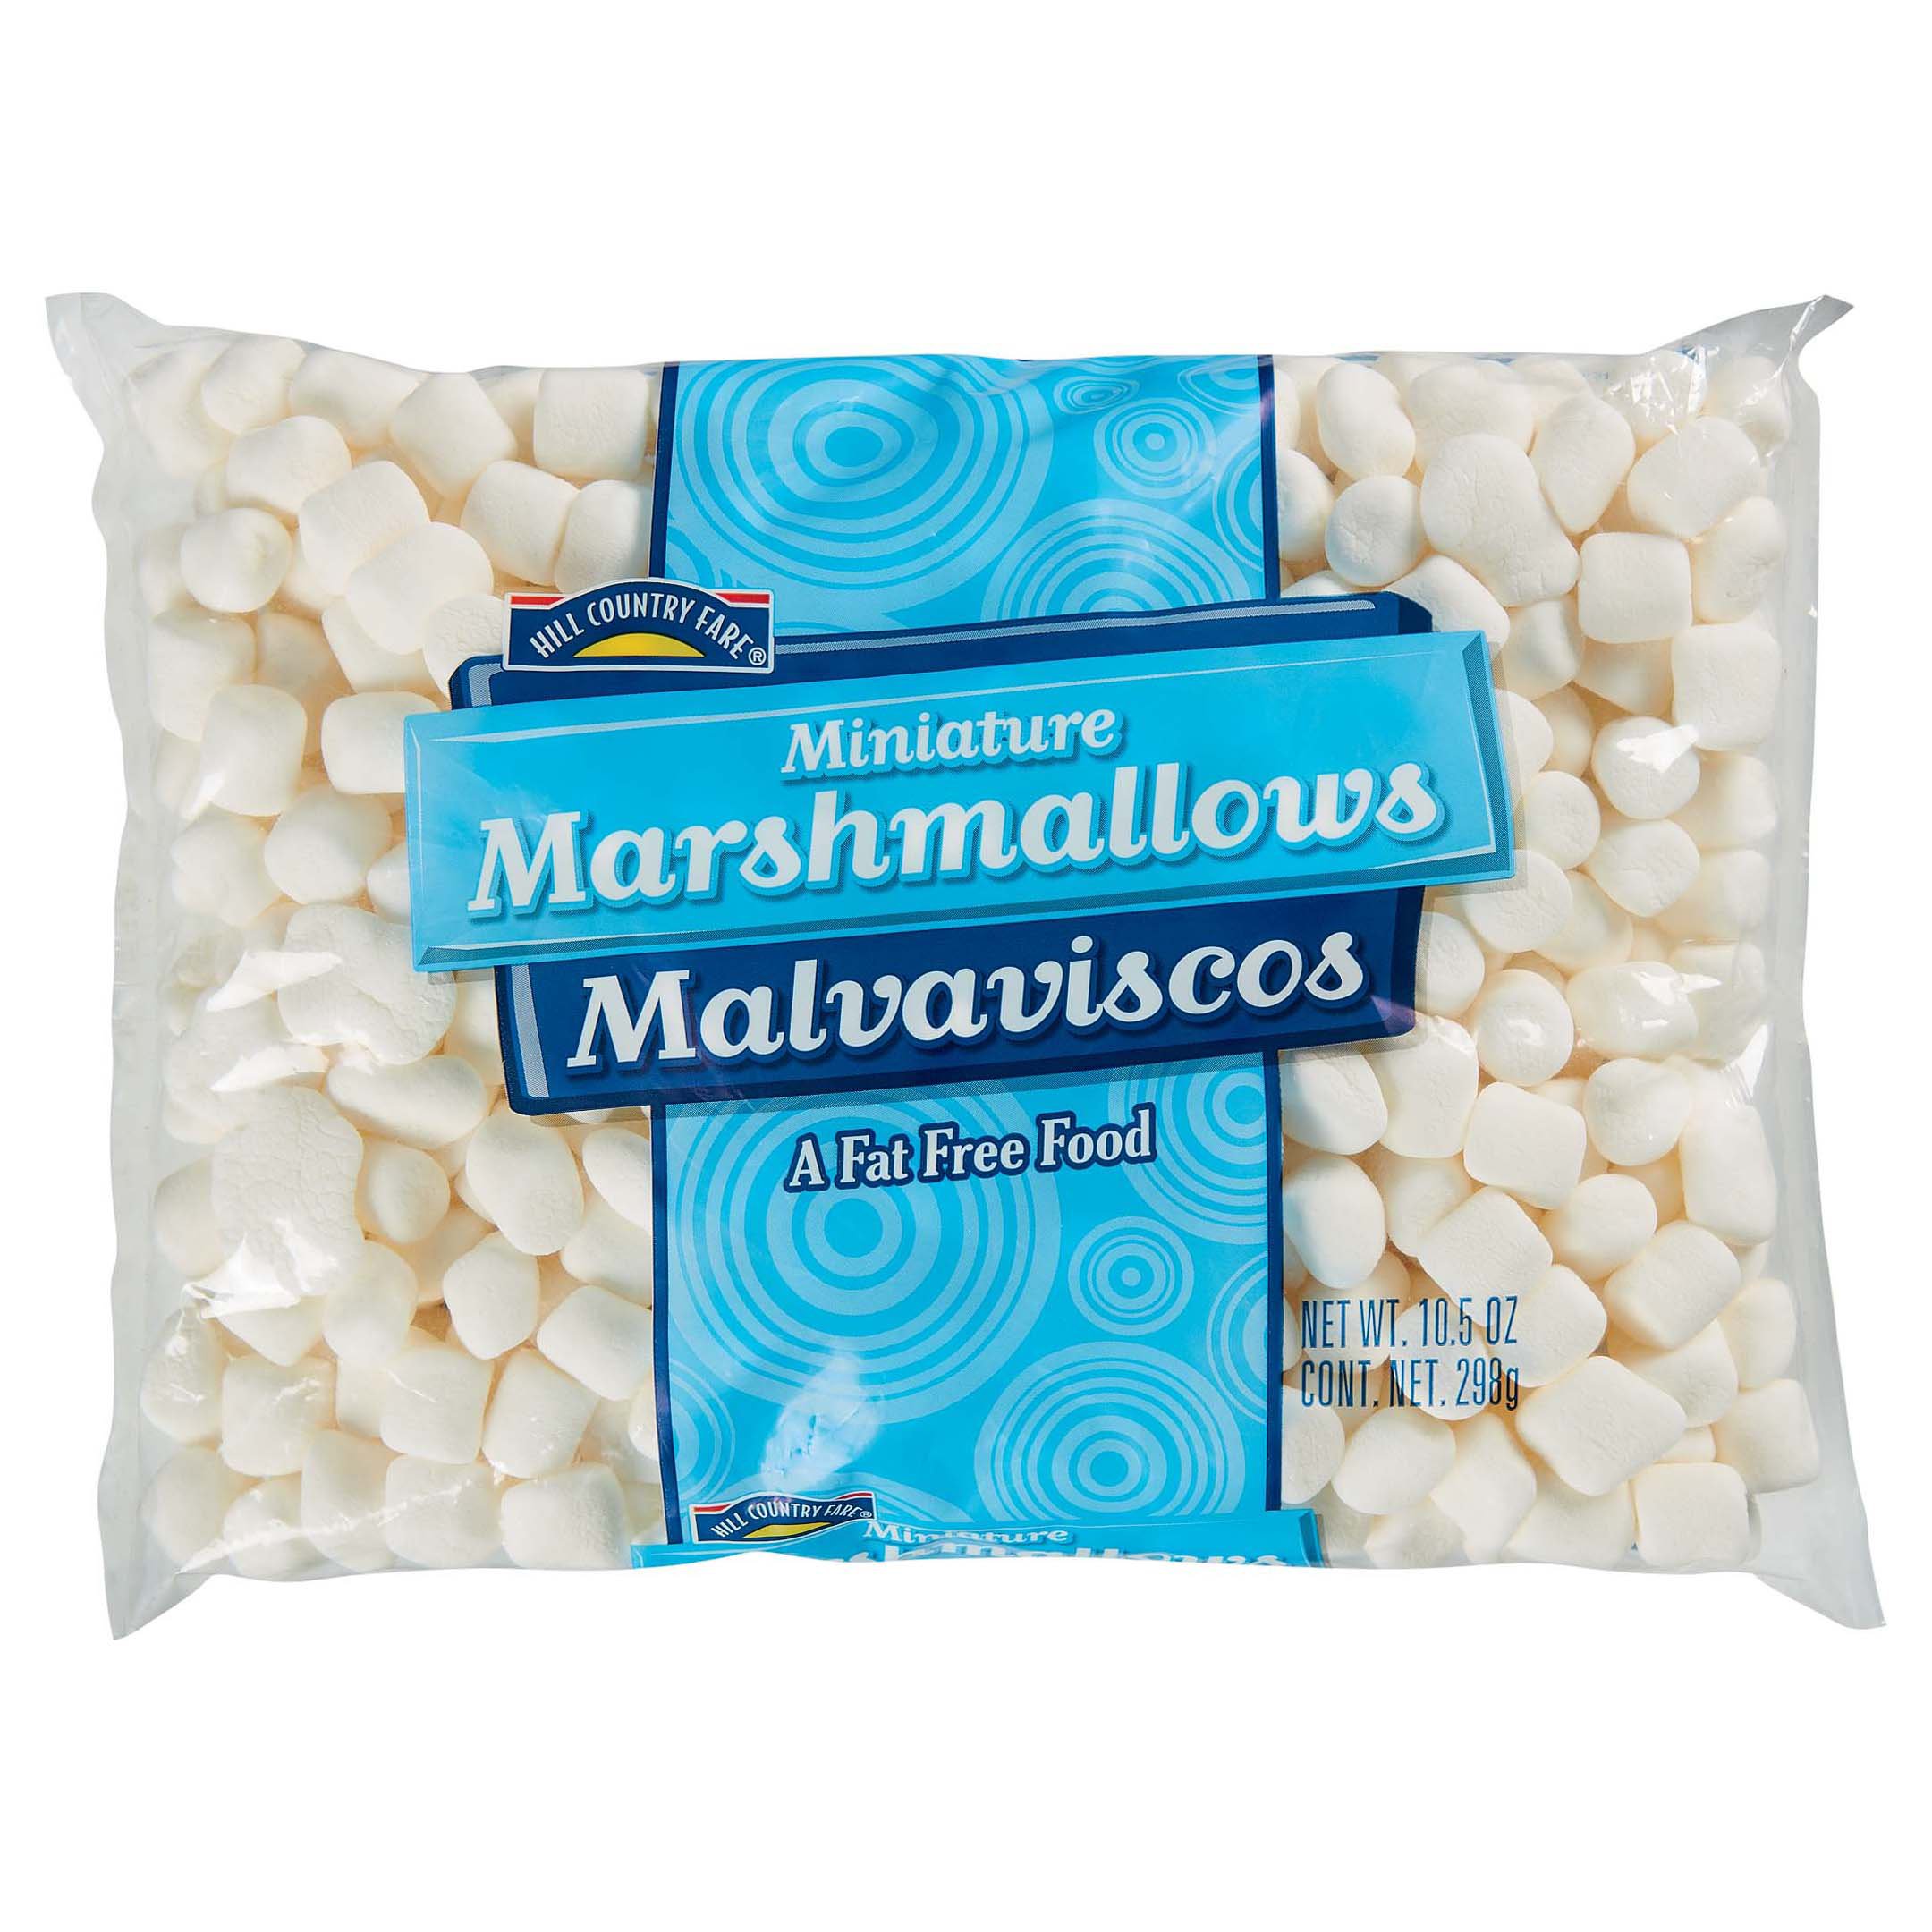 Campfire Mini Marshmallow Snack Pack - Shop Baking Ingredients at H-E-B